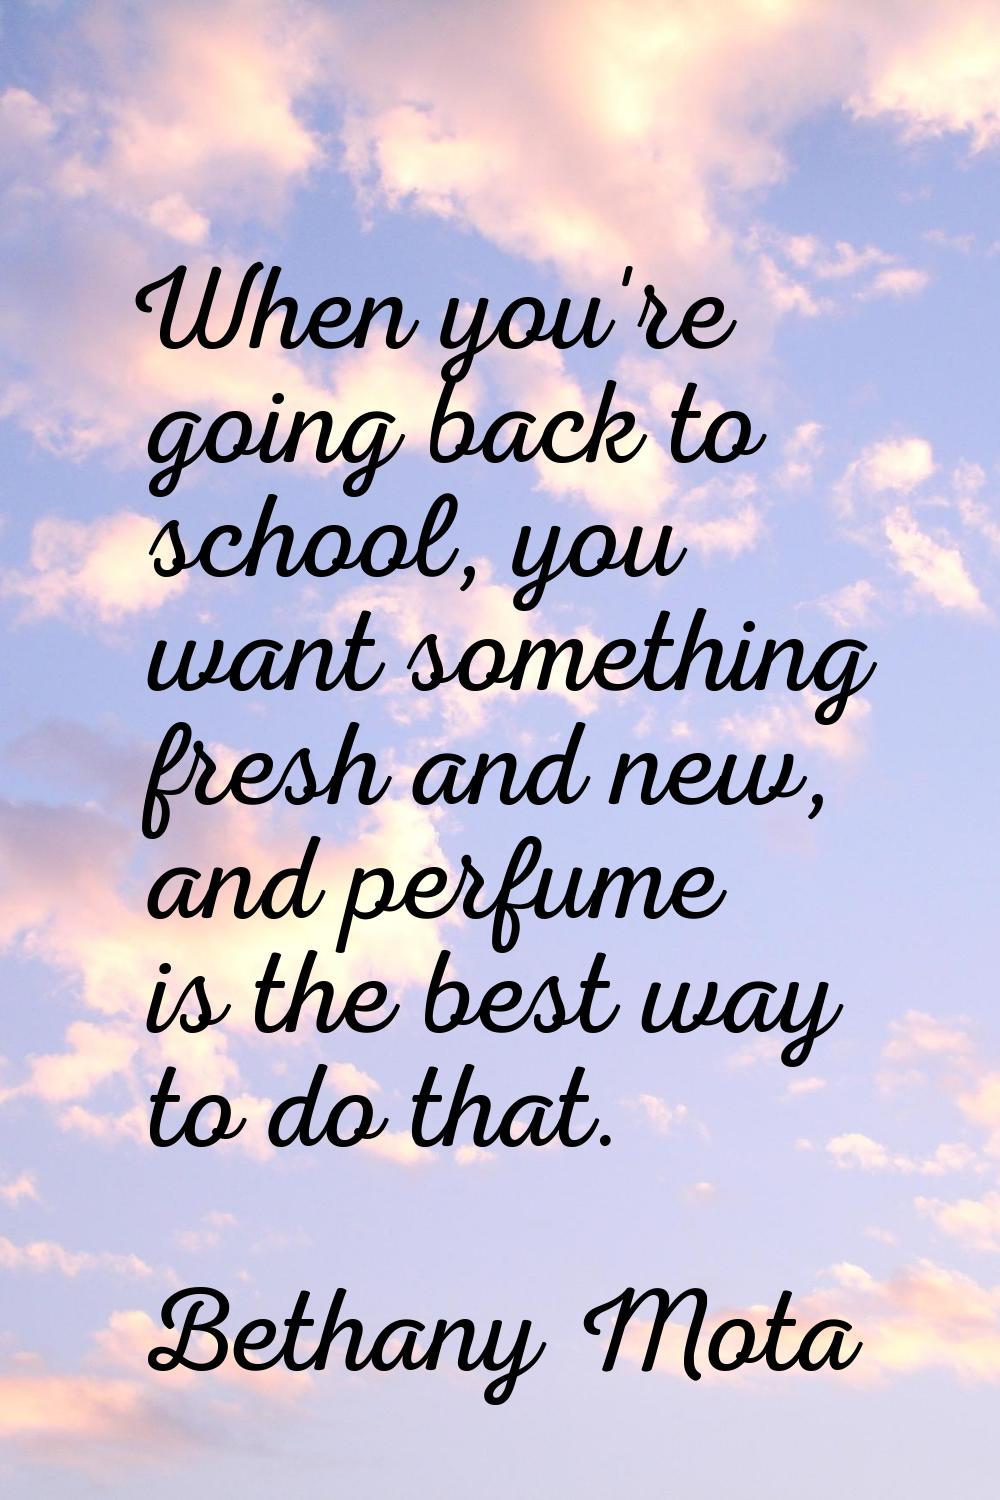 When you're going back to school, you want something fresh and new, and perfume is the best way to 